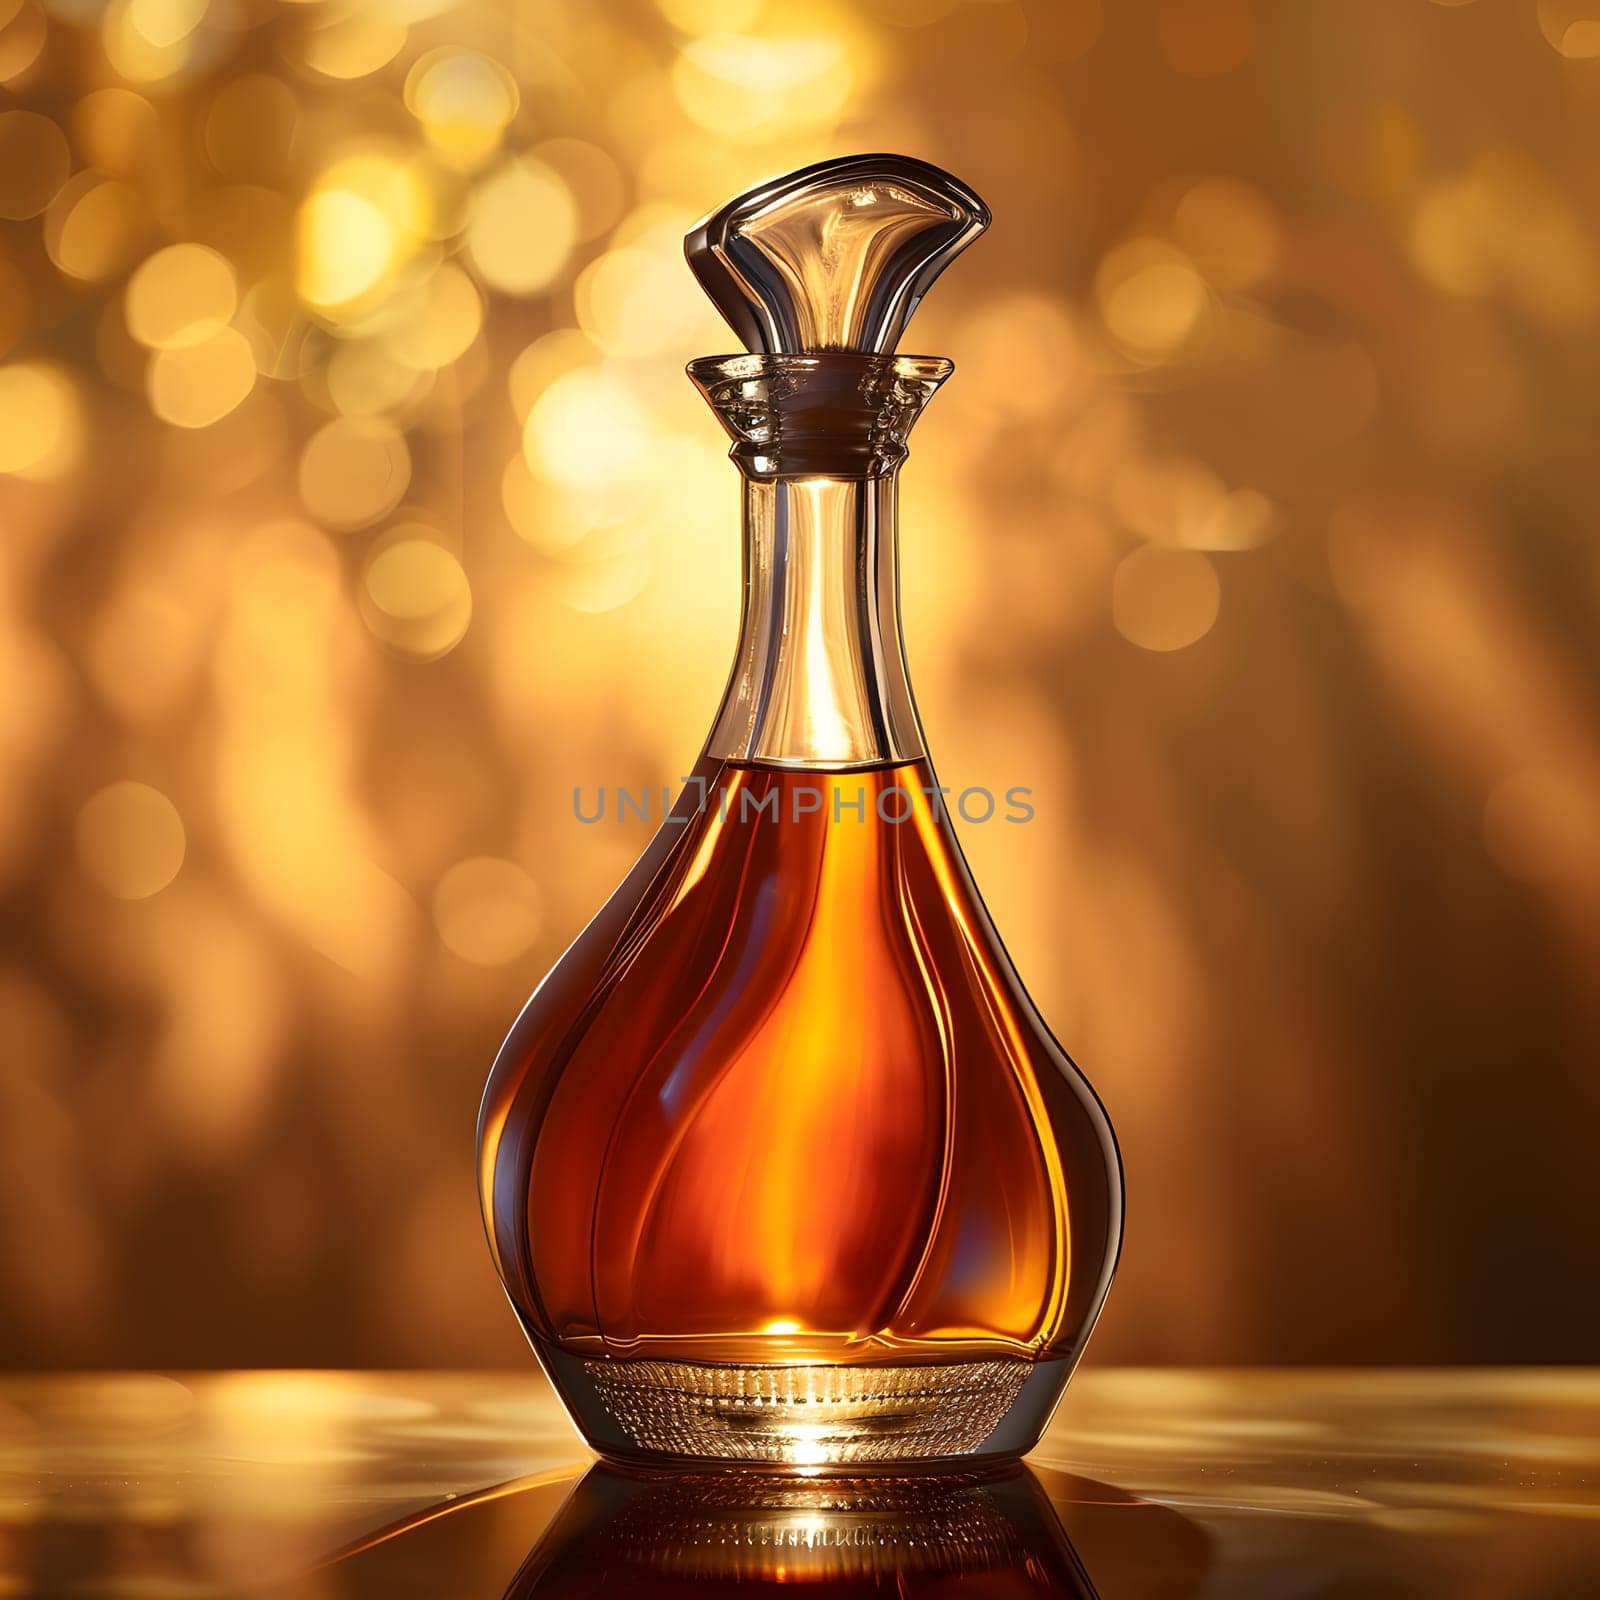 An amber glass bottle of cognac rests on a wooden table, filled with brown liquid. This exquisite drinkware is a musthave for any barware collection